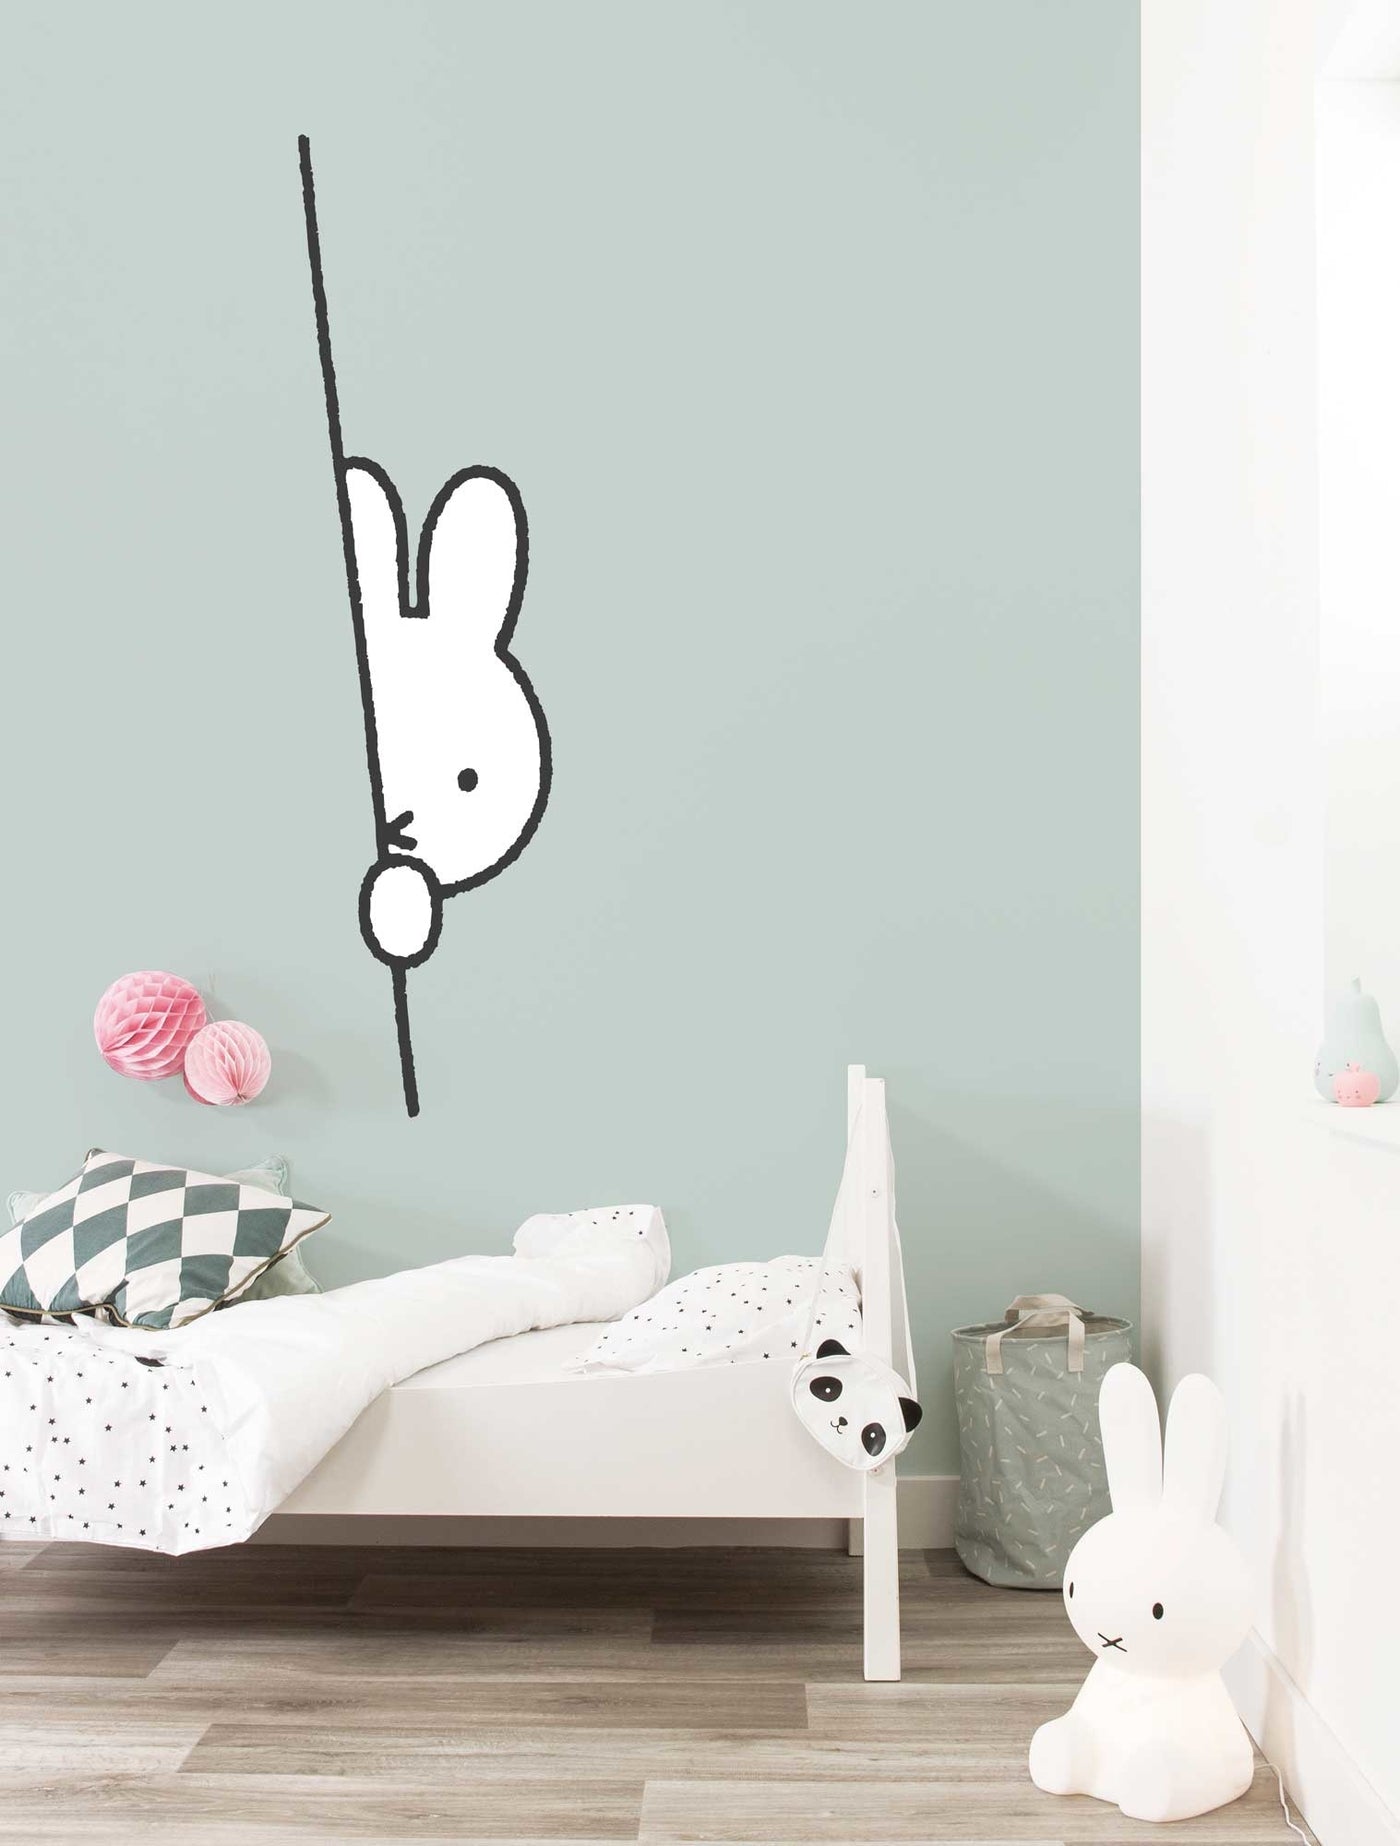 Miffy Stickers for Sale